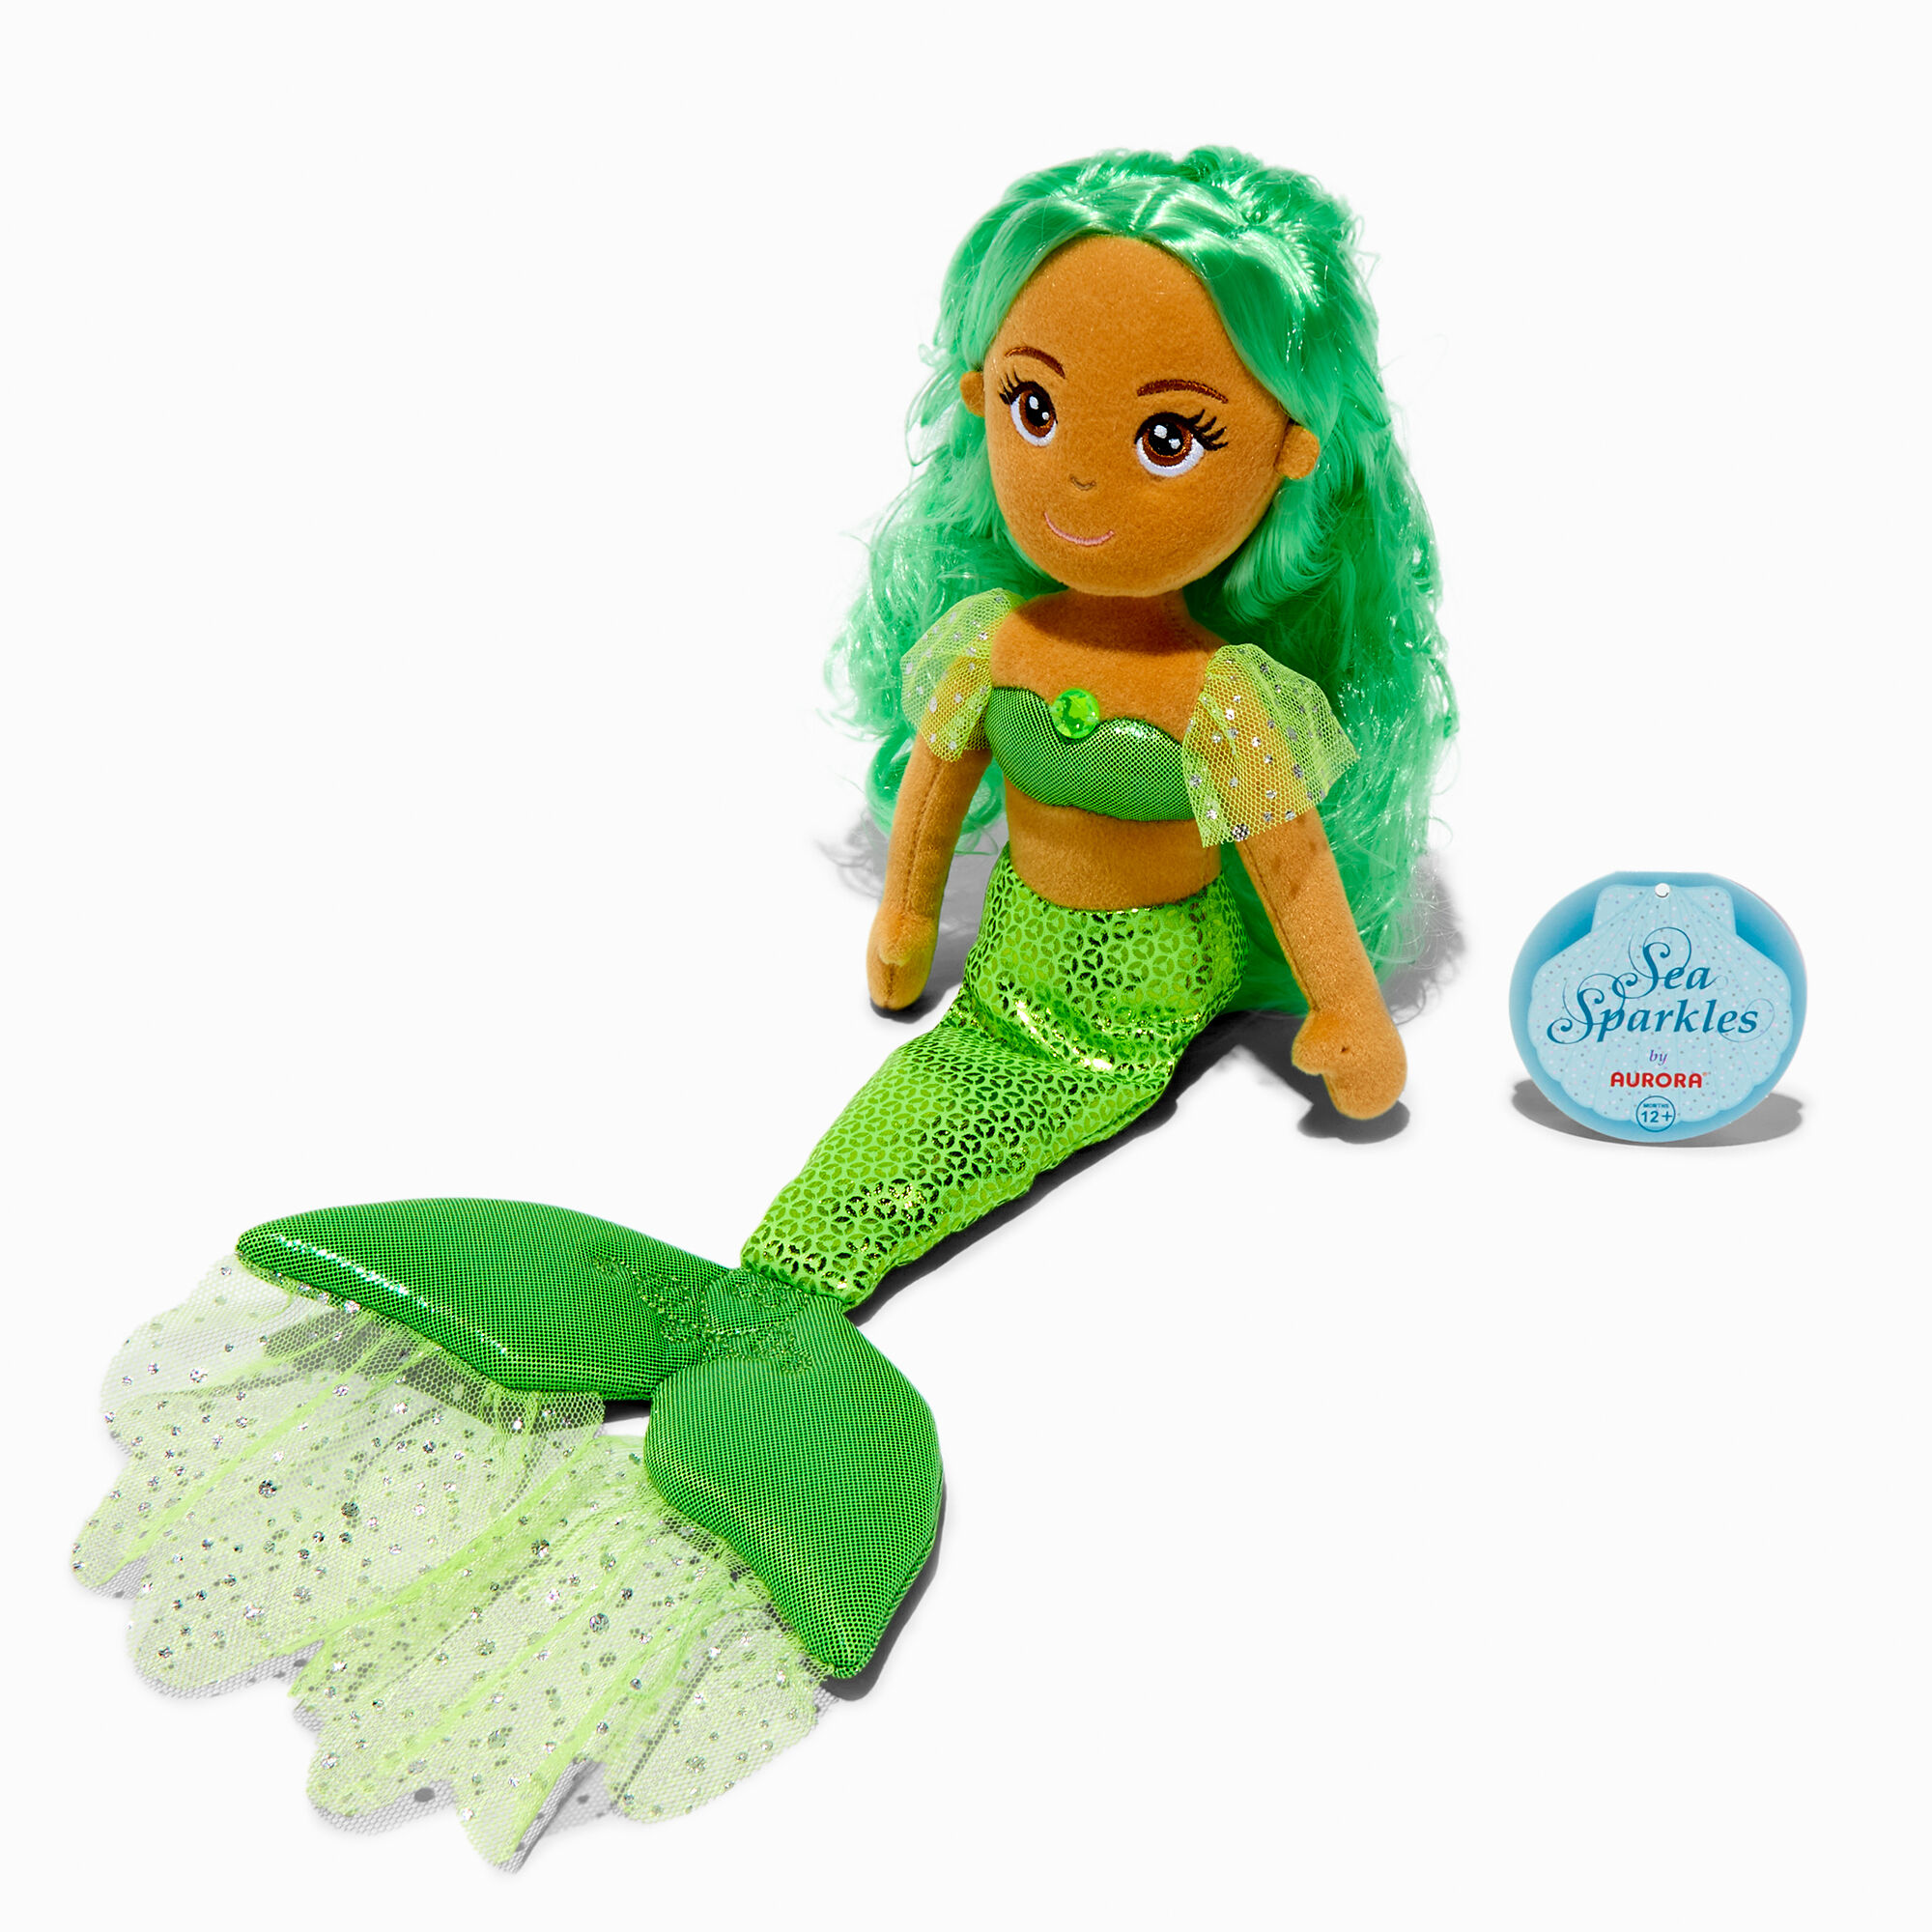 View Claires Sea Sparkles Emerald Mermaid Plush Toy Green information